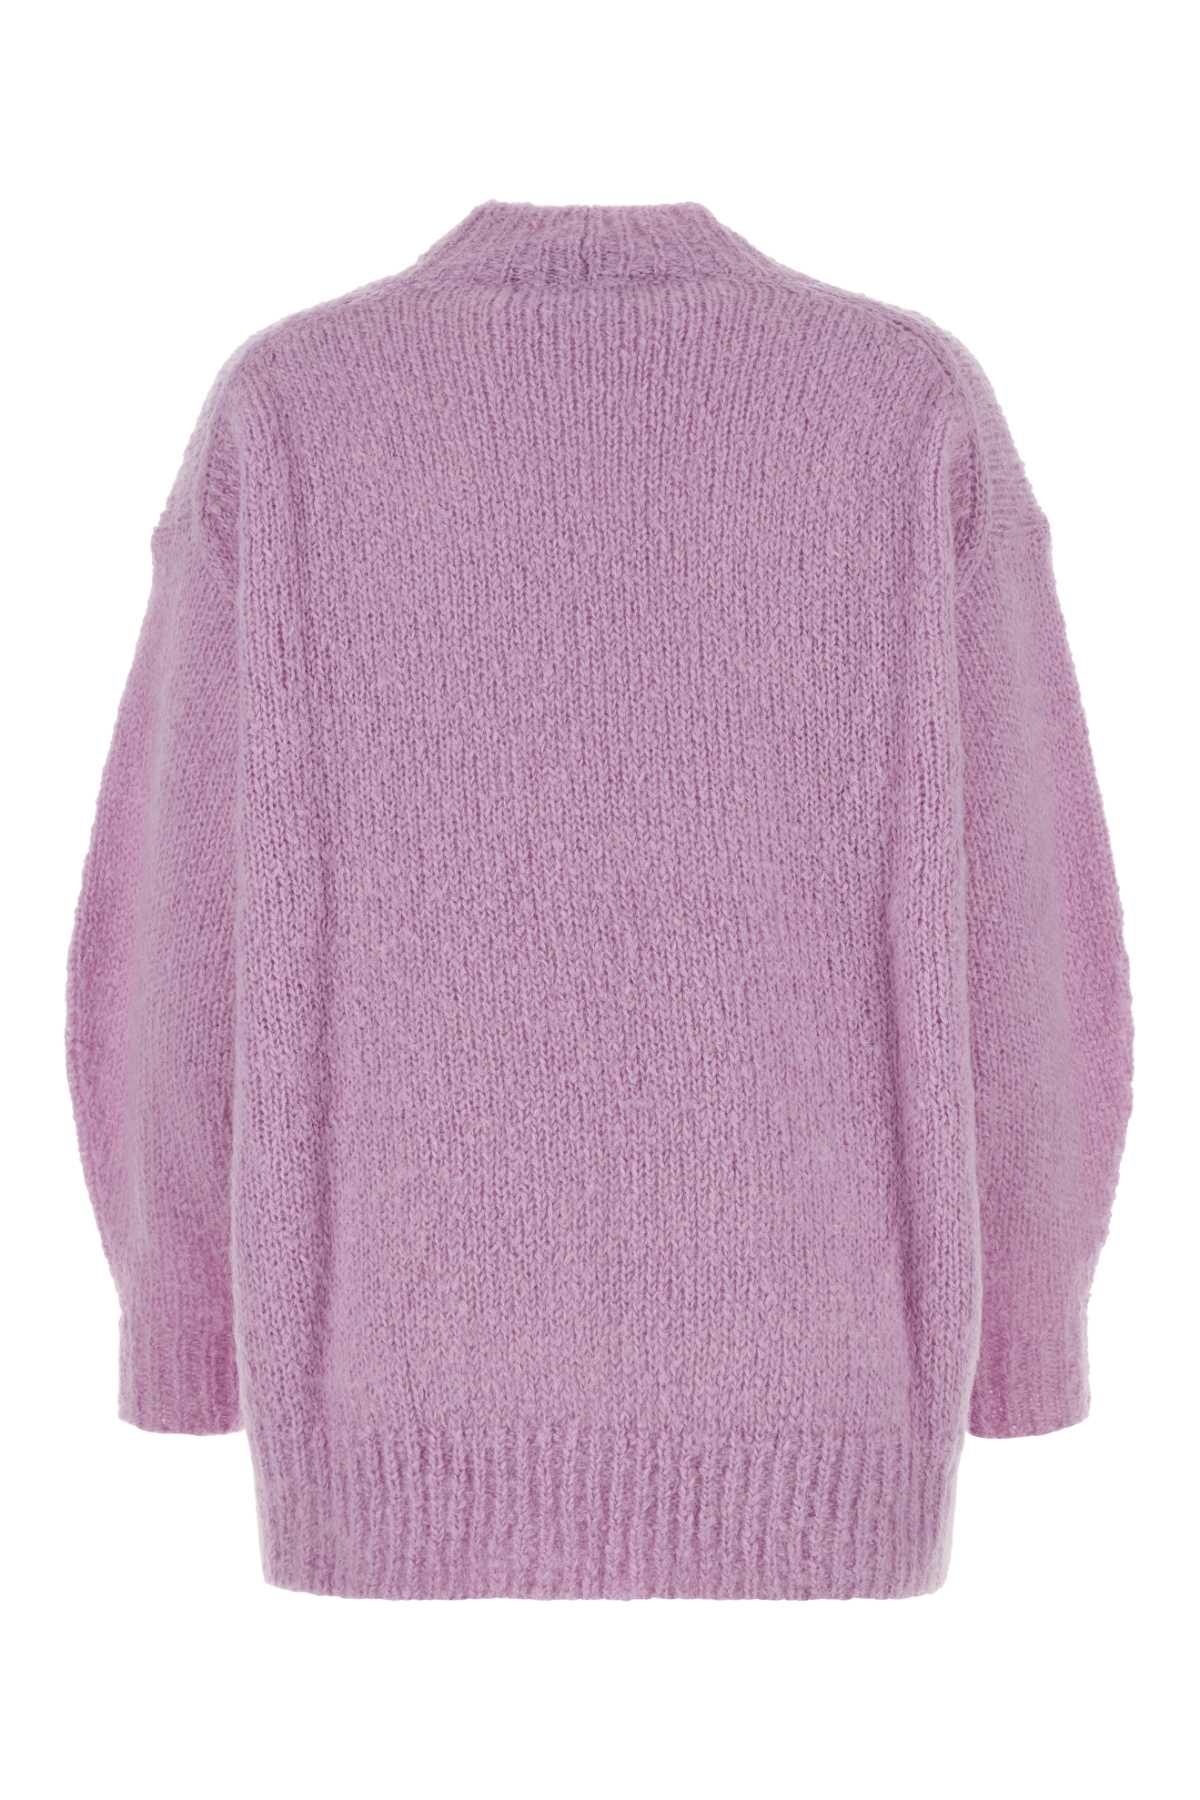 ISABEL MARANT LILAC MOHAIR BLEND IDOL OVERSIZE SWEATER